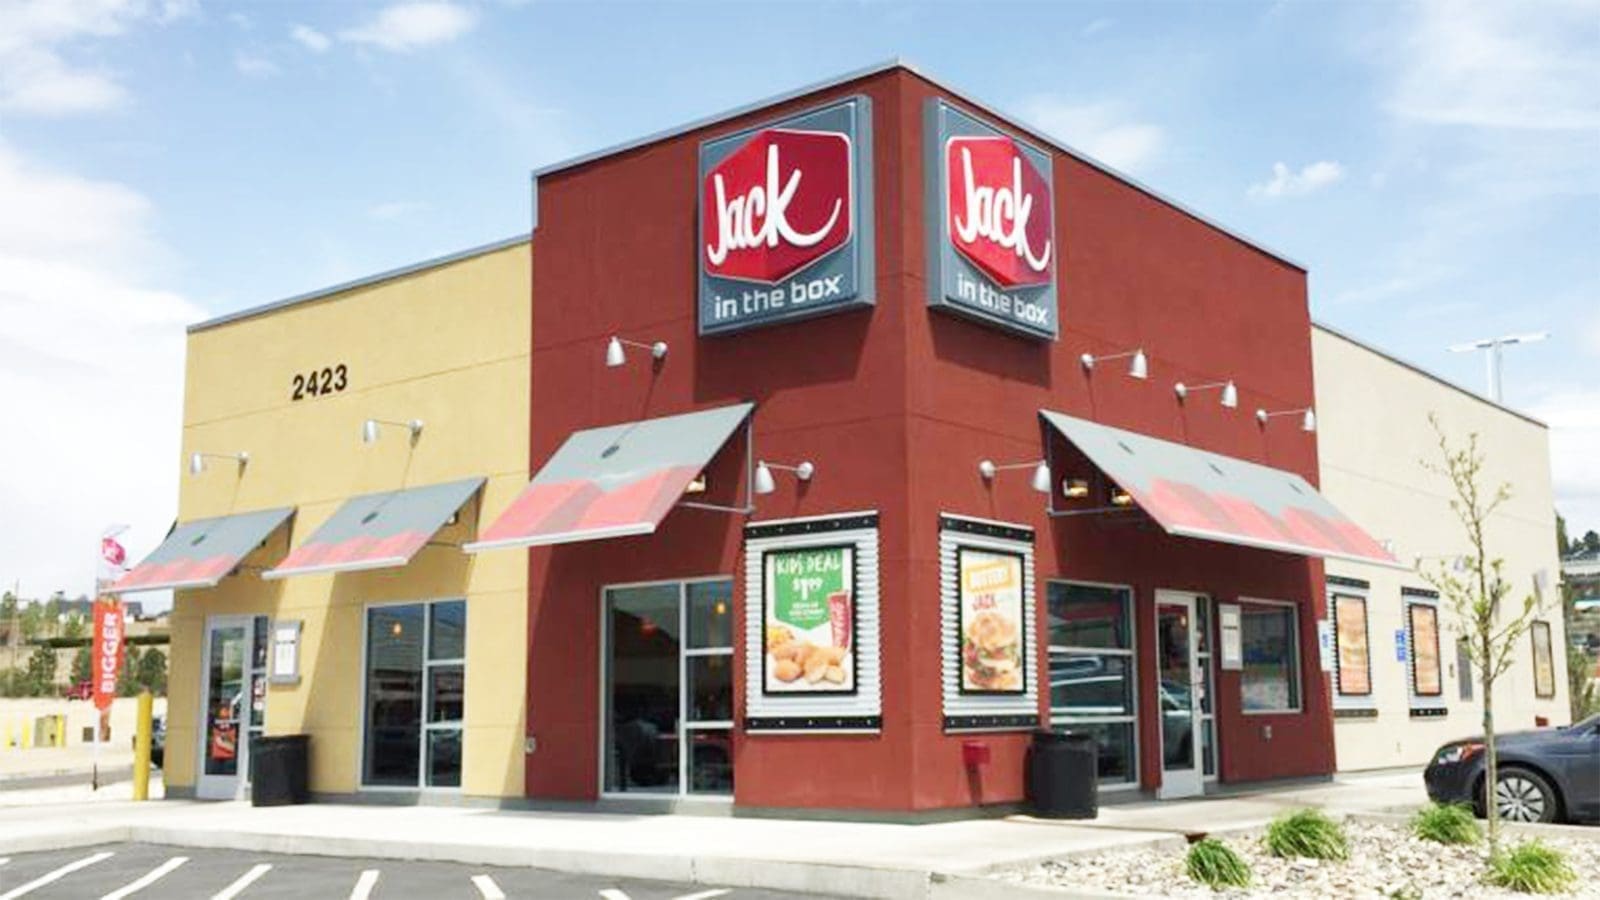 American fast-food restaurant Jack in the Box partners with Jolt to digitize its food safety